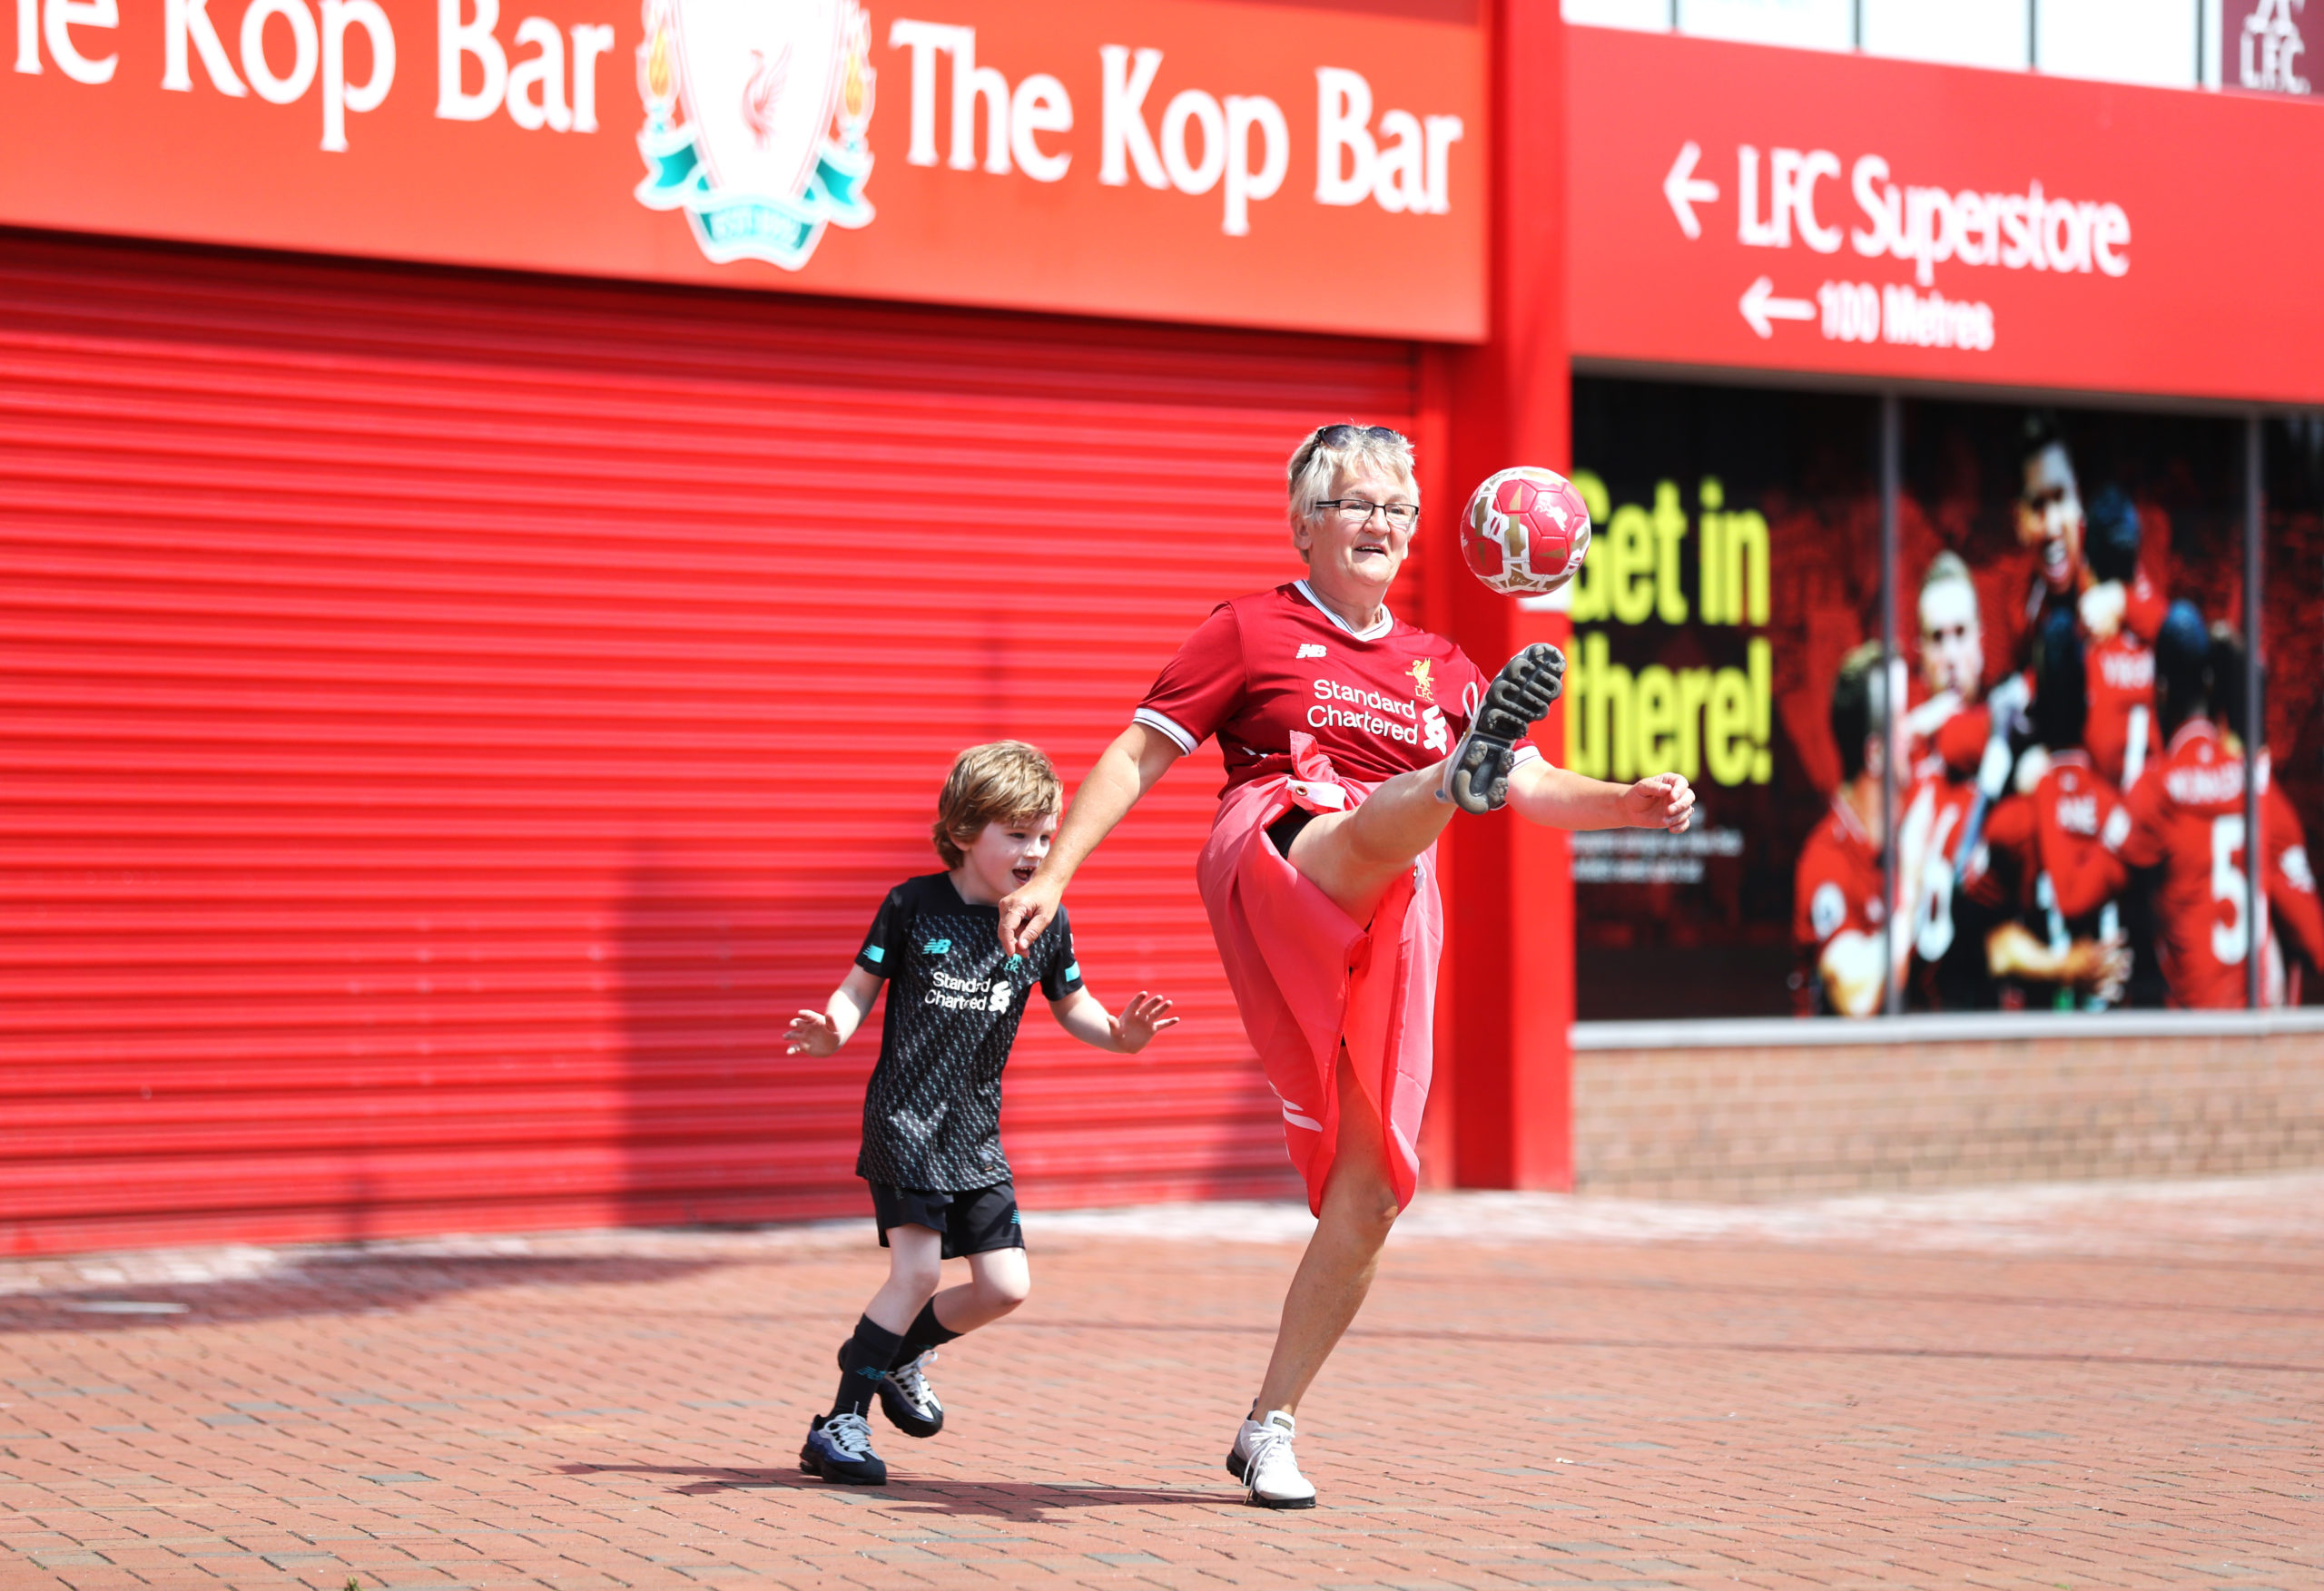 Thirty years on from Kenny Dalglish lifting the league trophy, generations of Liverpool fans were celebrating outside Anfield, some more energetically than others